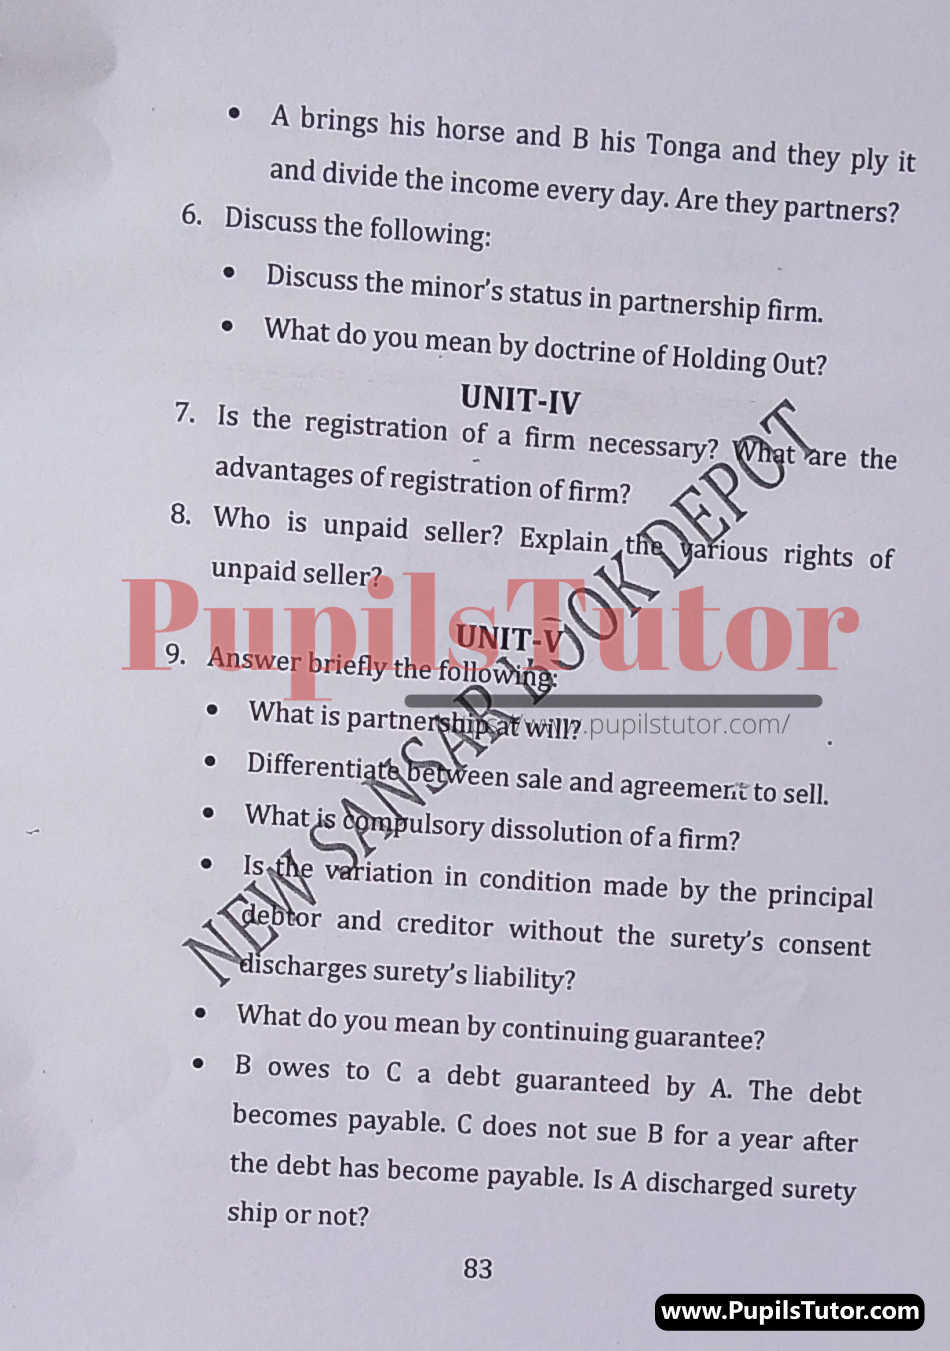 M.D. University LL.B. Special Contract Second Semester Important Question Answer And Solution - www.pupilstutor.com (Paper Page Number 2)